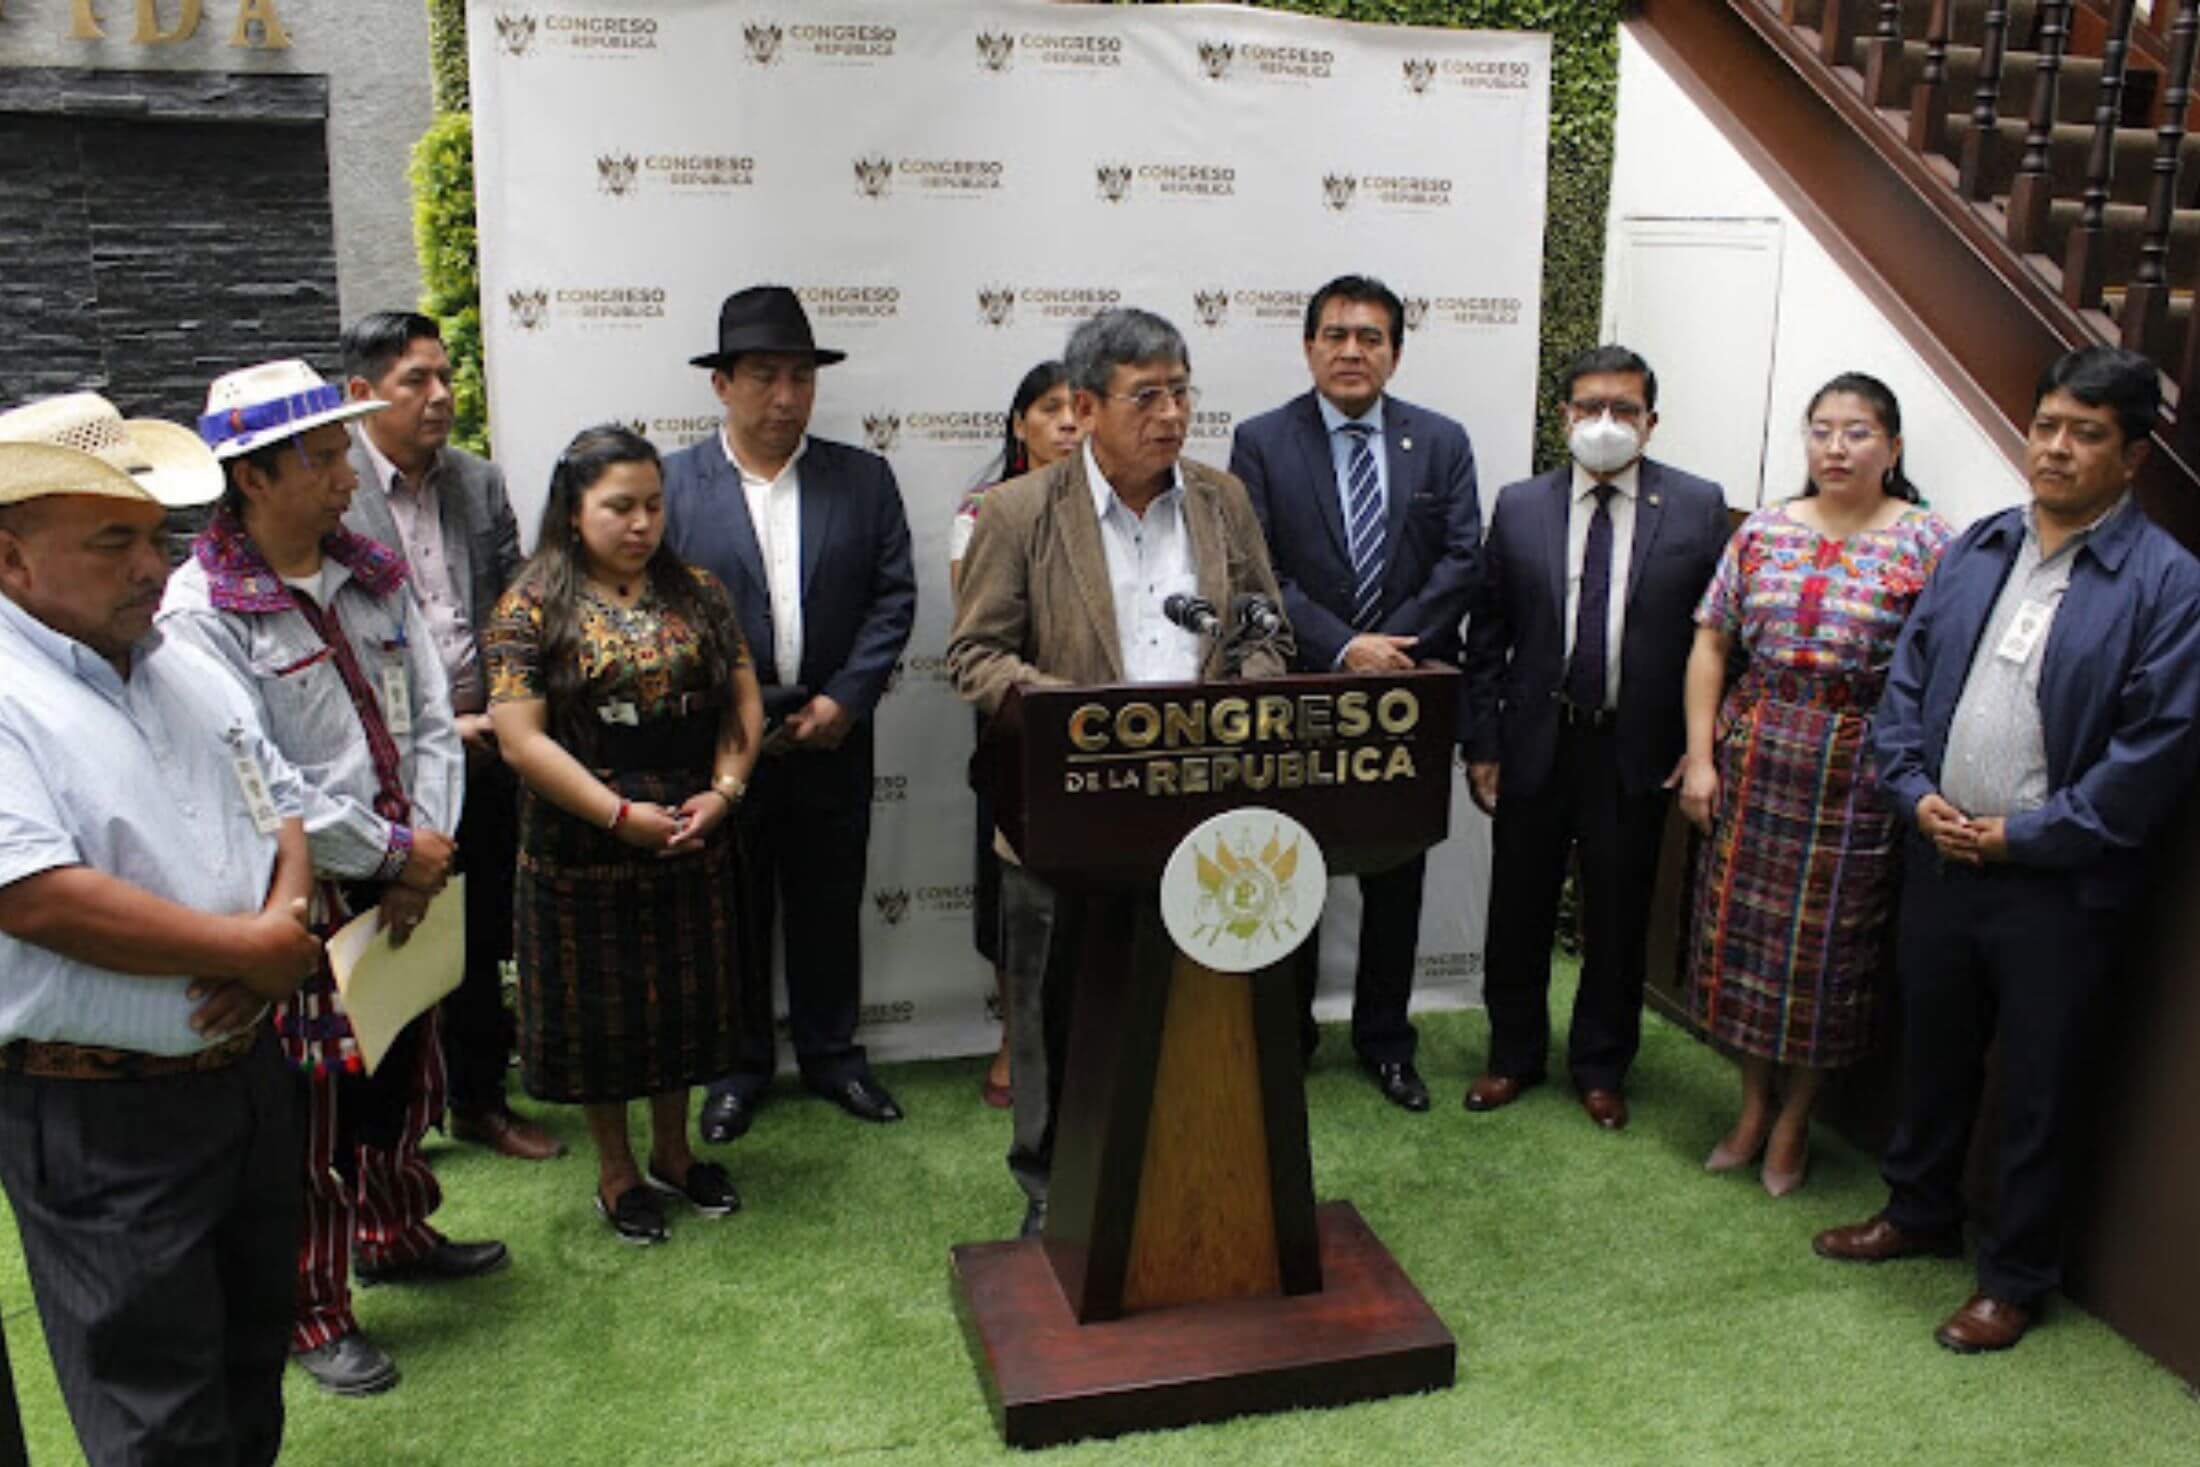 An Indigenous man speaks at a podium at a press conference at the Guatemalan Congress. Ten Indigenous people stand in a semi-circle behind him.